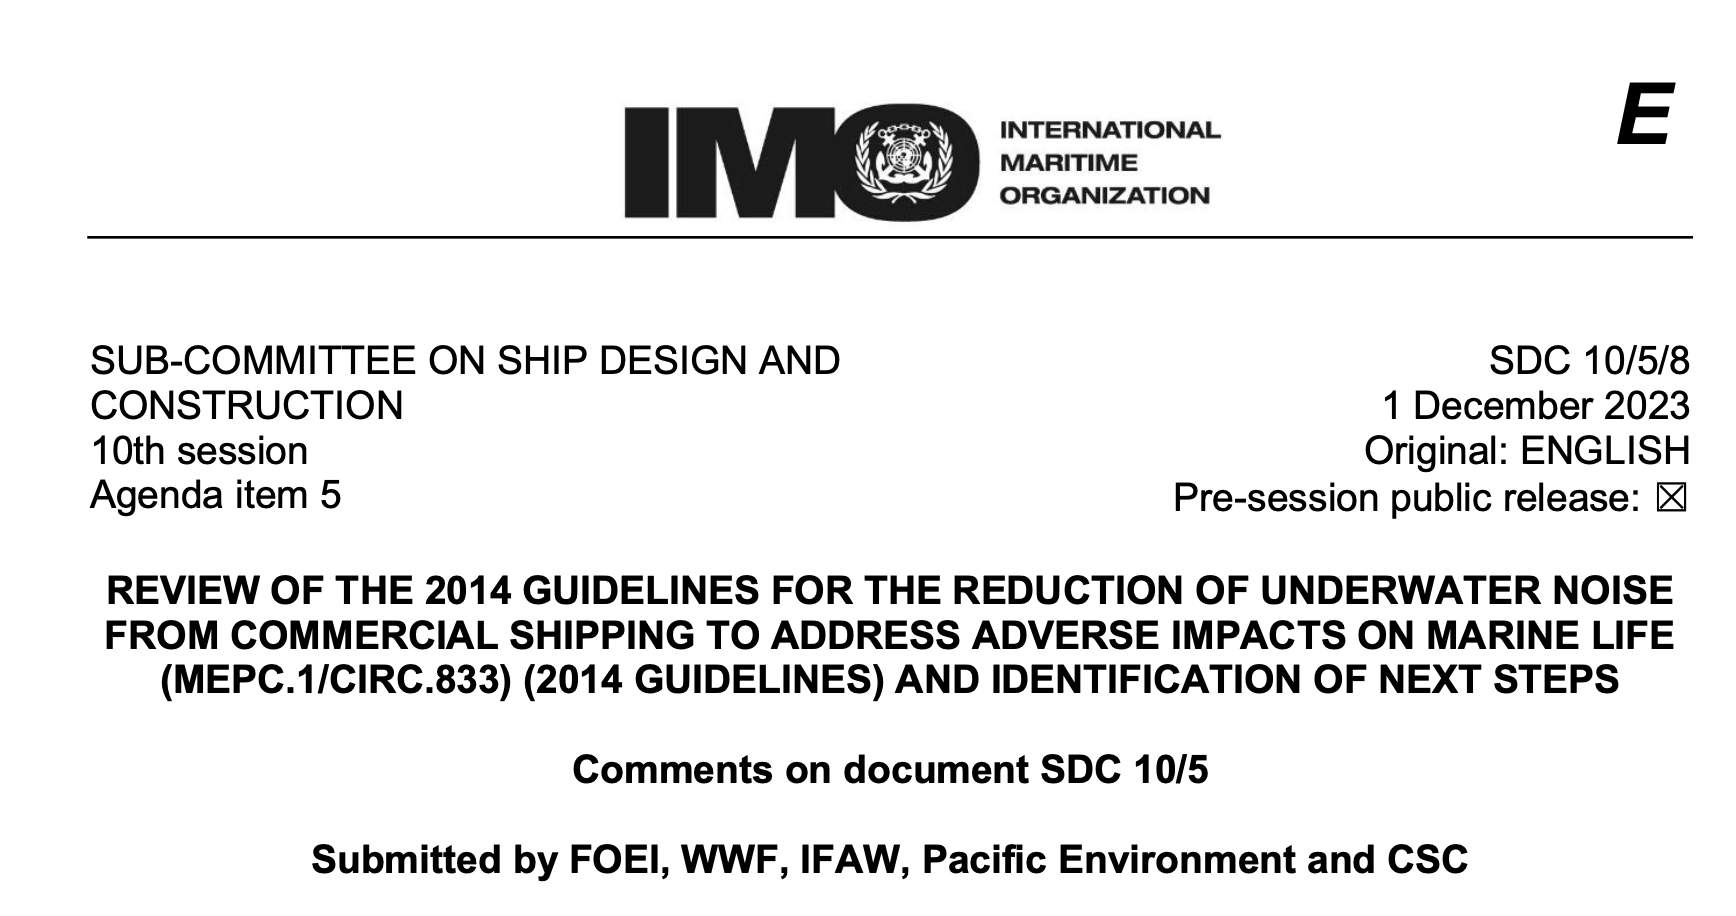 SDC 10-5-8 - Comments on document SDC 105 (FOEI, WWF, IFAW, Pacific...)